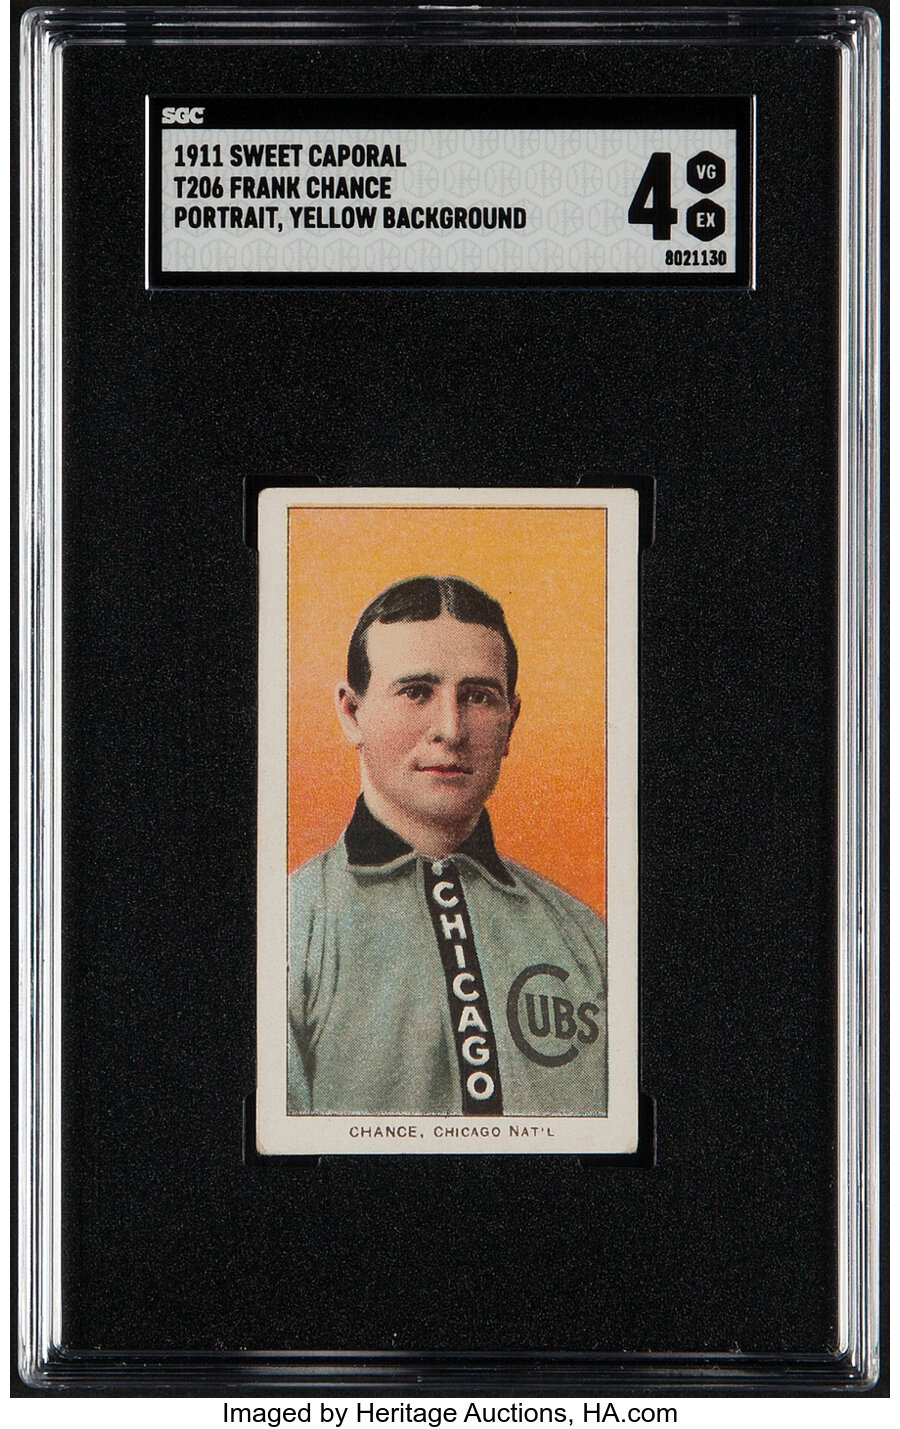 1909-11 T206 Sweet Caporal 350-460/42OP Frank Chance (Portrait - Yellow Background) SGC VG/EX 4